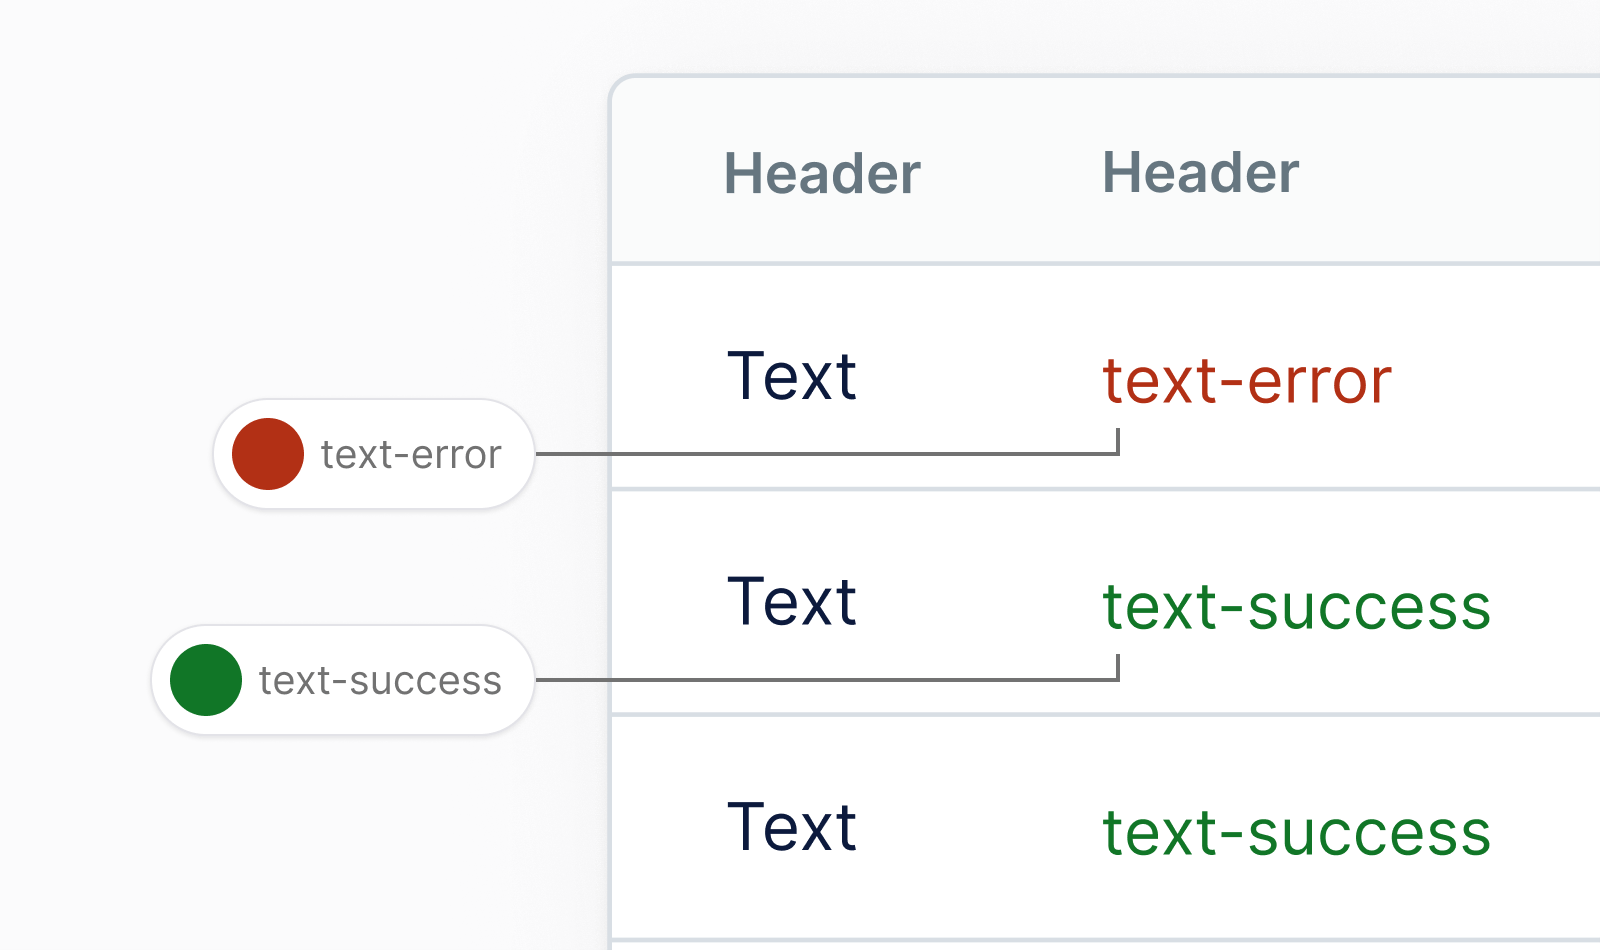 Table status text